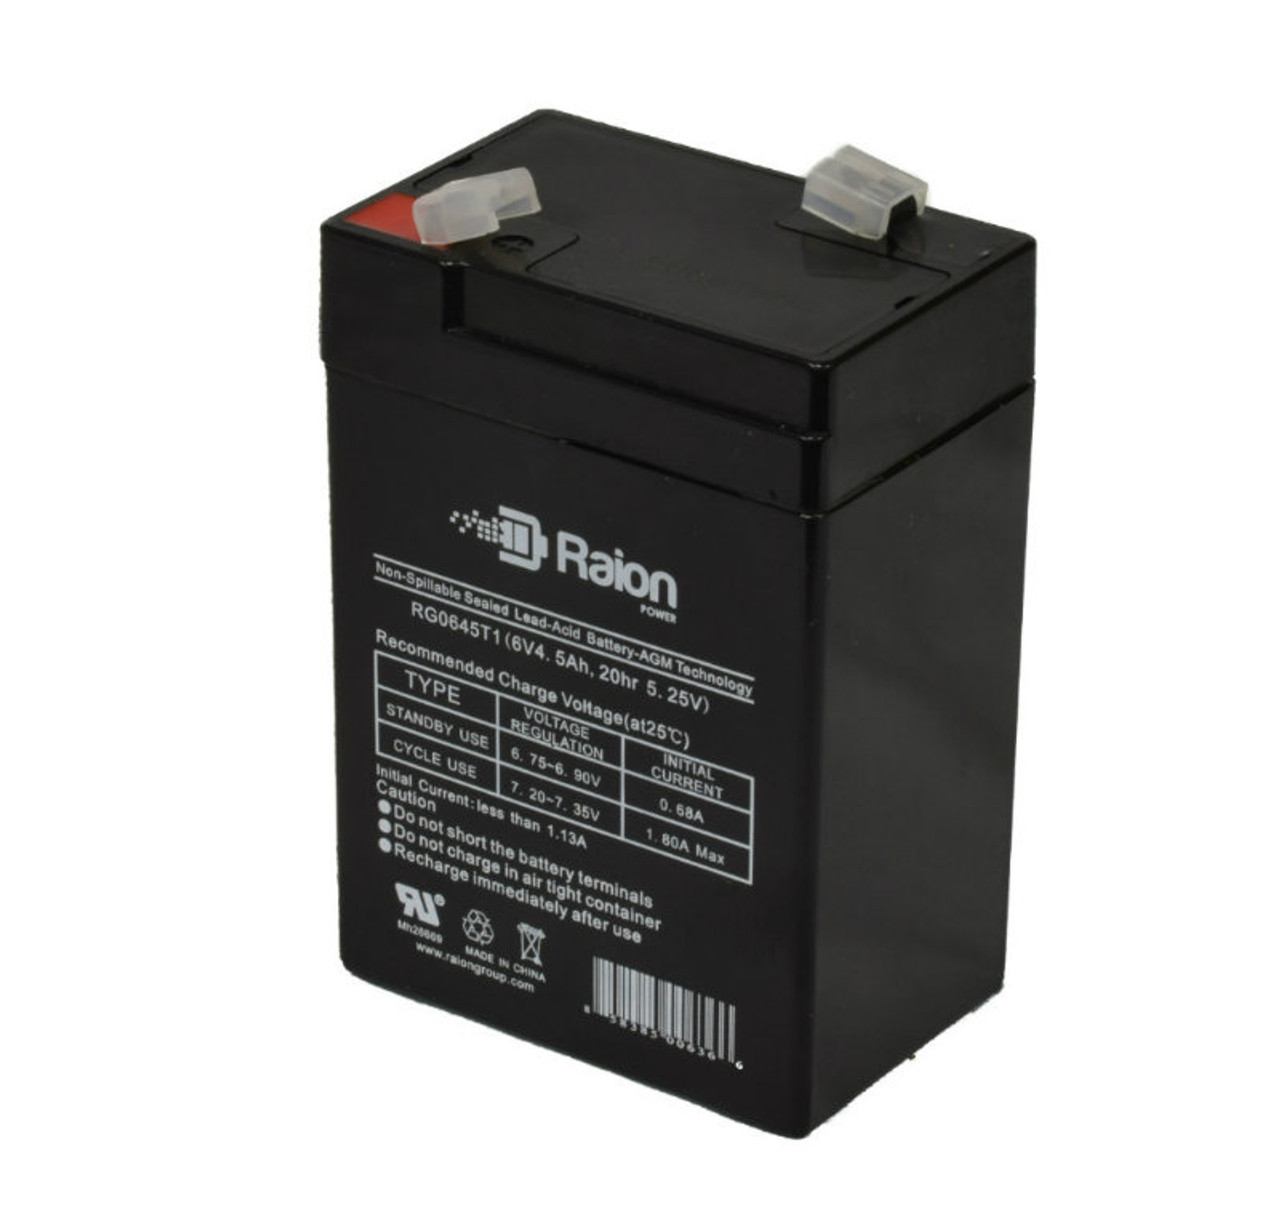 Raion Power RG0645T1 6V 4.5Ah Replacement Battery Cartridge for Chilwee 3-FM-4